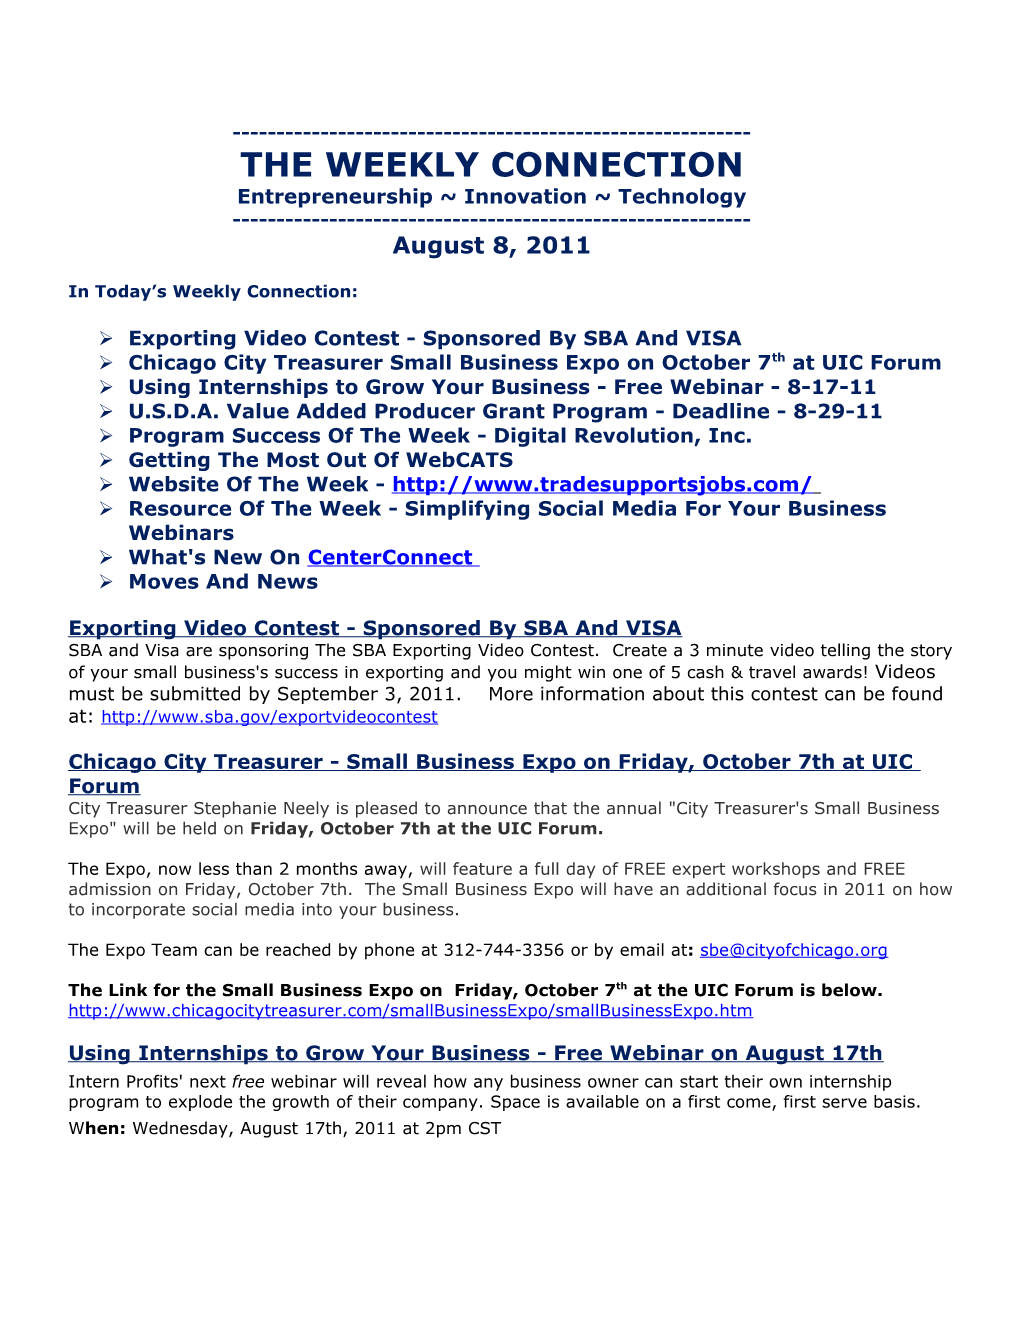 The Weekly Connection s2